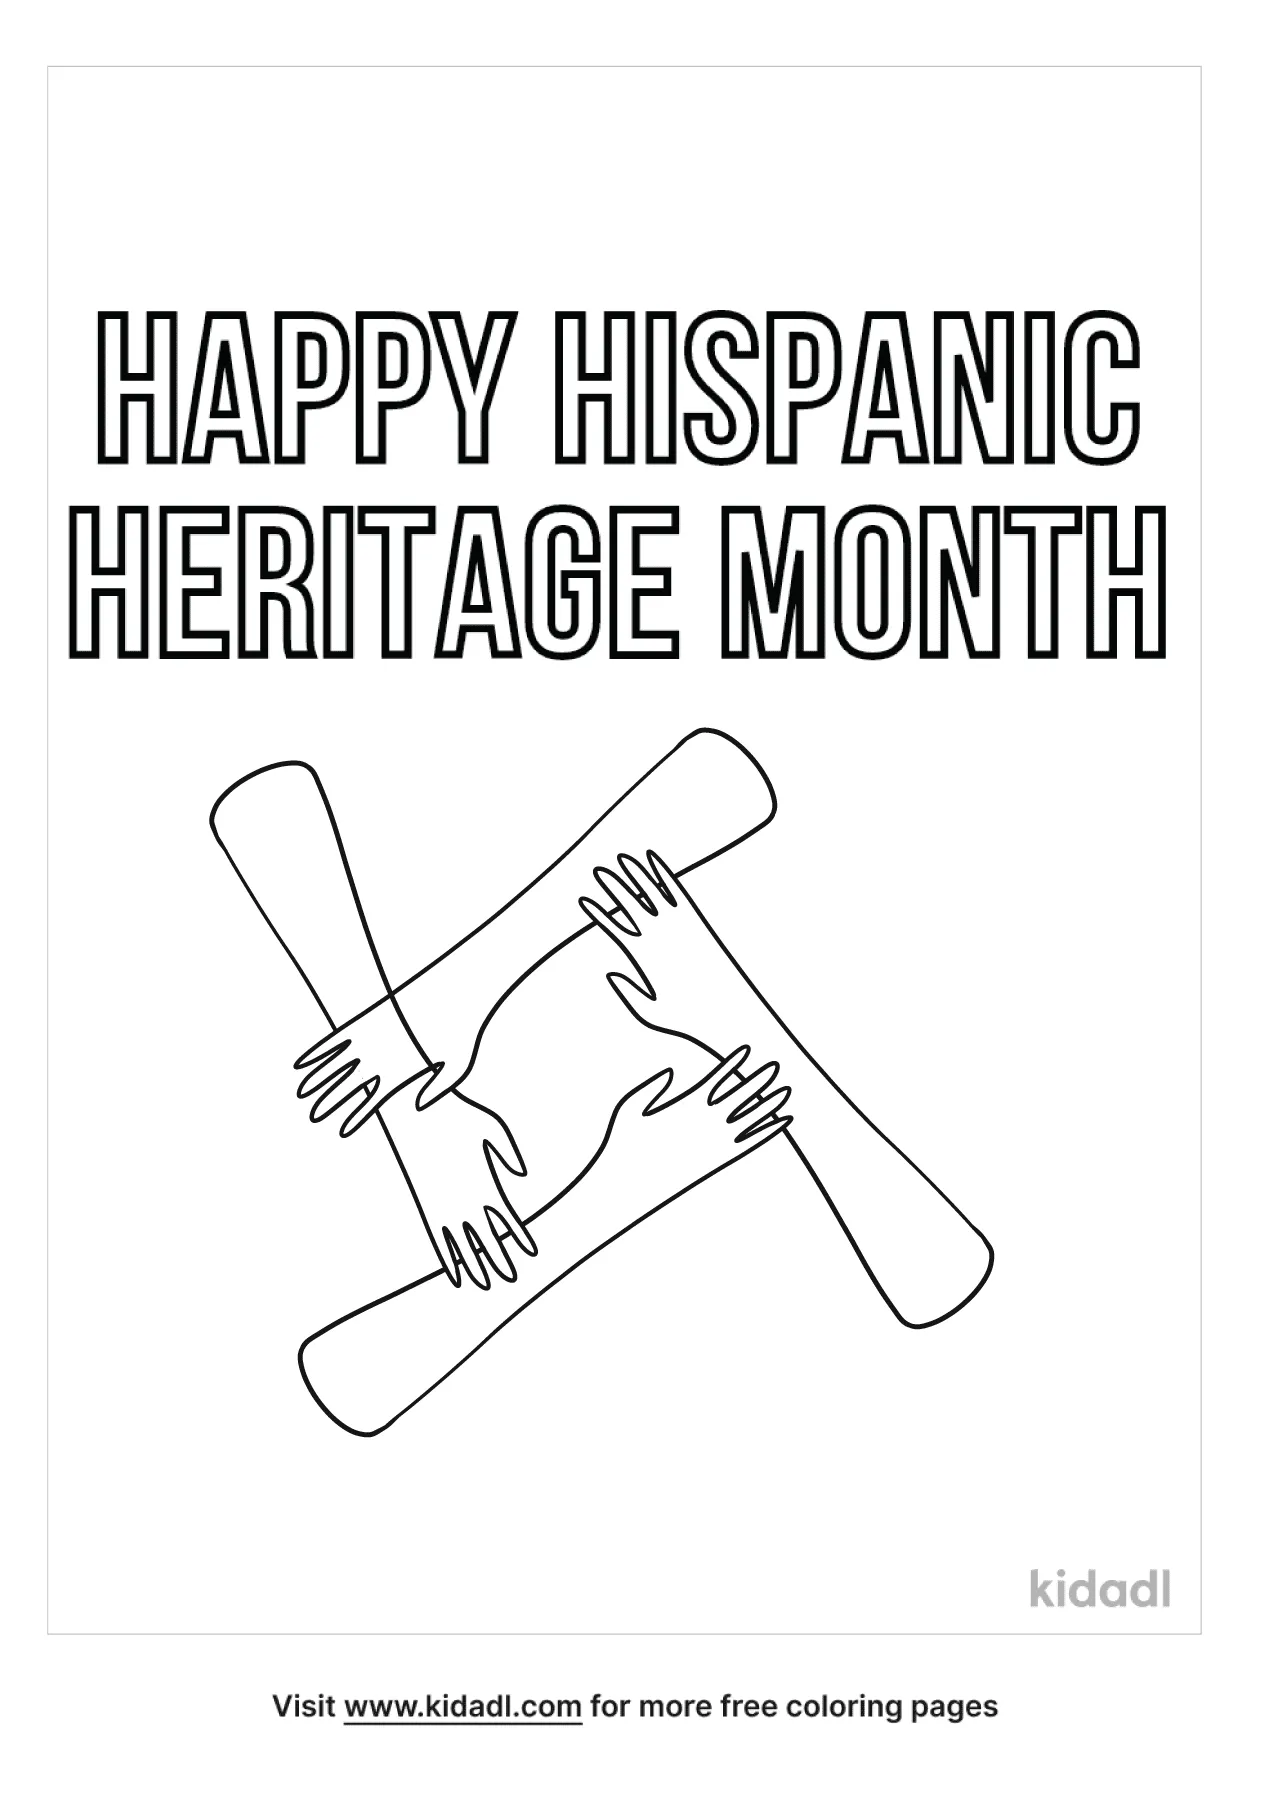 Free hispanic heritage month coloring page coloring page printables